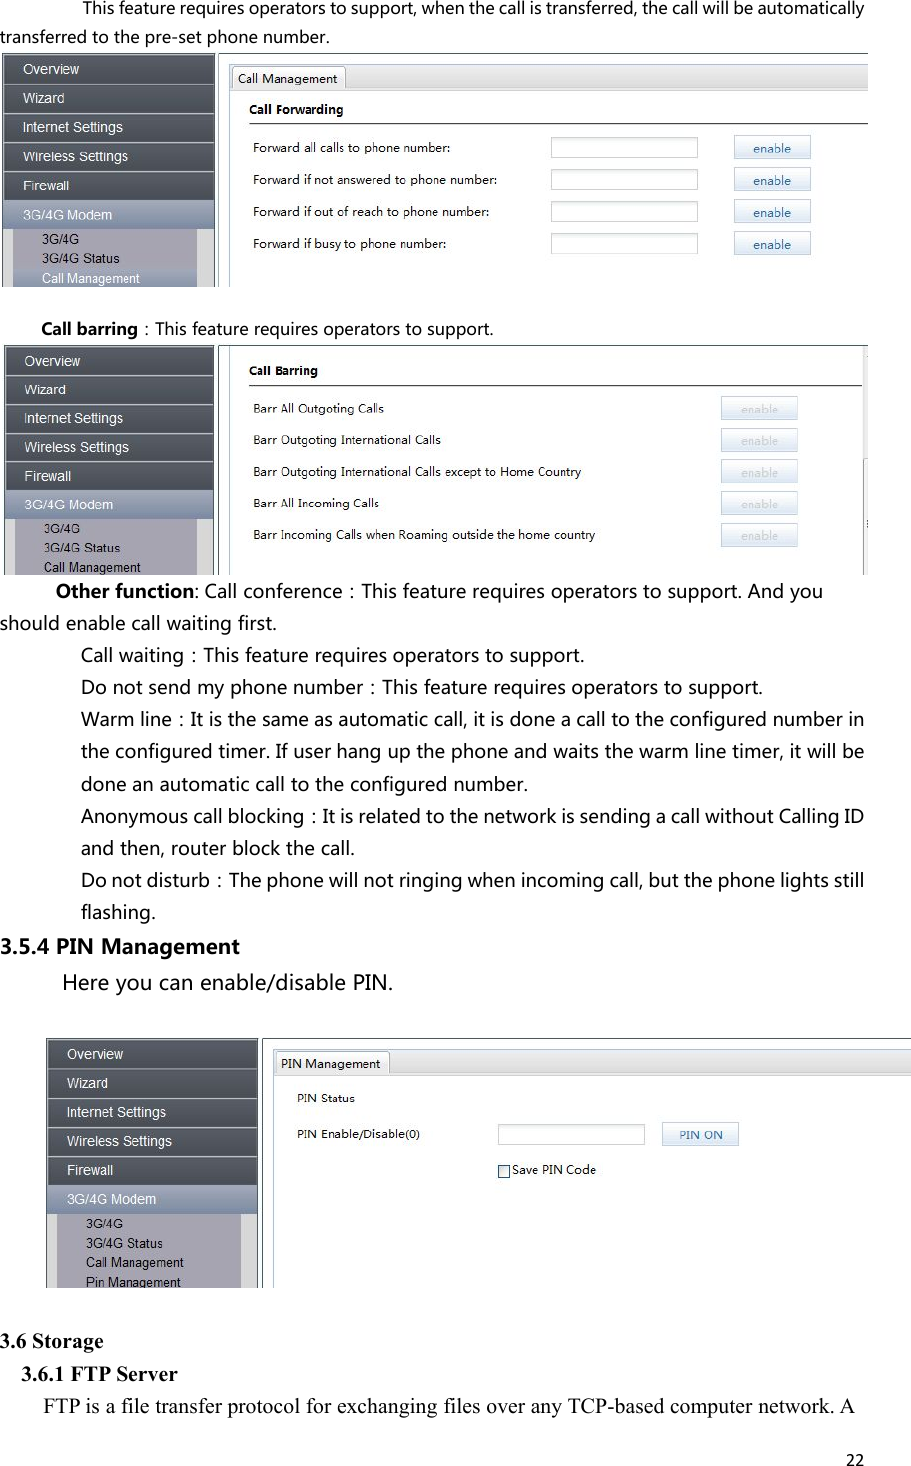 22This feature requires operators to support, when the call is transferred, the call will be automaticallytransferred to the pre-set phone number.Call barring：This feature requires operators to support.Other function: Call conference：This feature requires operators to support. And youshould enable call waiting first.Call waiting：This feature requires operators to support.Do not send my phone number：This feature requires operators to support.Warm line：It is the same as automatic call, it is done a call to the configured number inthe configured timer. If user hang up the phone and waits the warm line timer, it will bedone an automatic call to the configured number.Anonymous call blocking：It is related to the network is sending a call without Calling IDand then, router block the call.Do not disturb：The phone will not ringing when incoming call, but the phone lights stillflashing.3.5.4 PIN ManagementHere you can enable/disable PIN.3.6 Storage3.6.1 FTP ServerFTP is a file transfer protocol for exchanging files over any TCP-based computer network. A